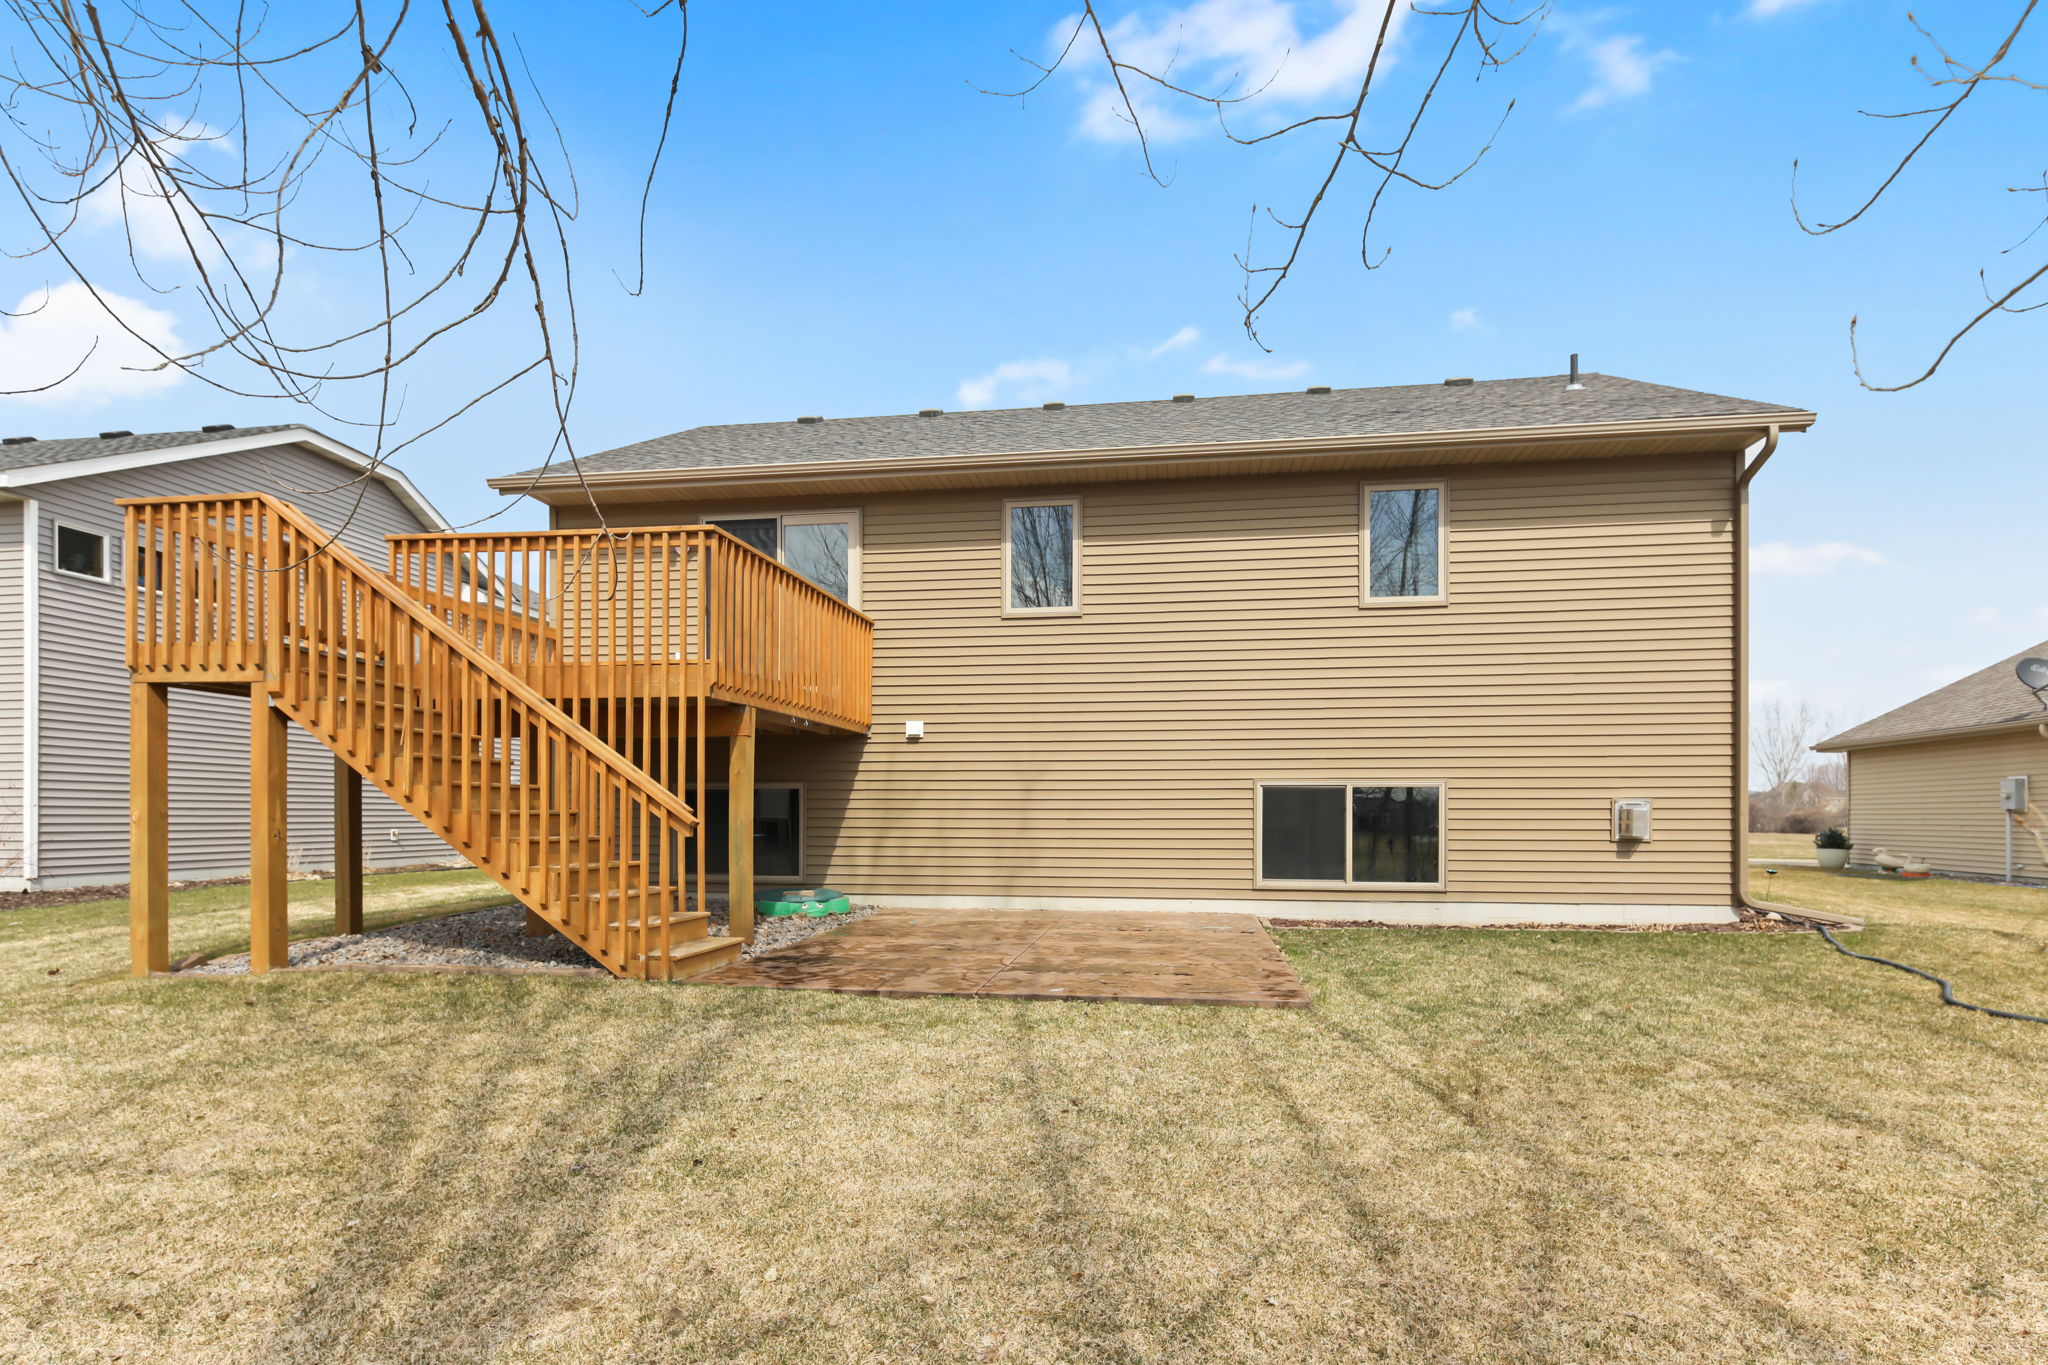  1707 7th St N, Sartell, MN 56377, US Photo 2